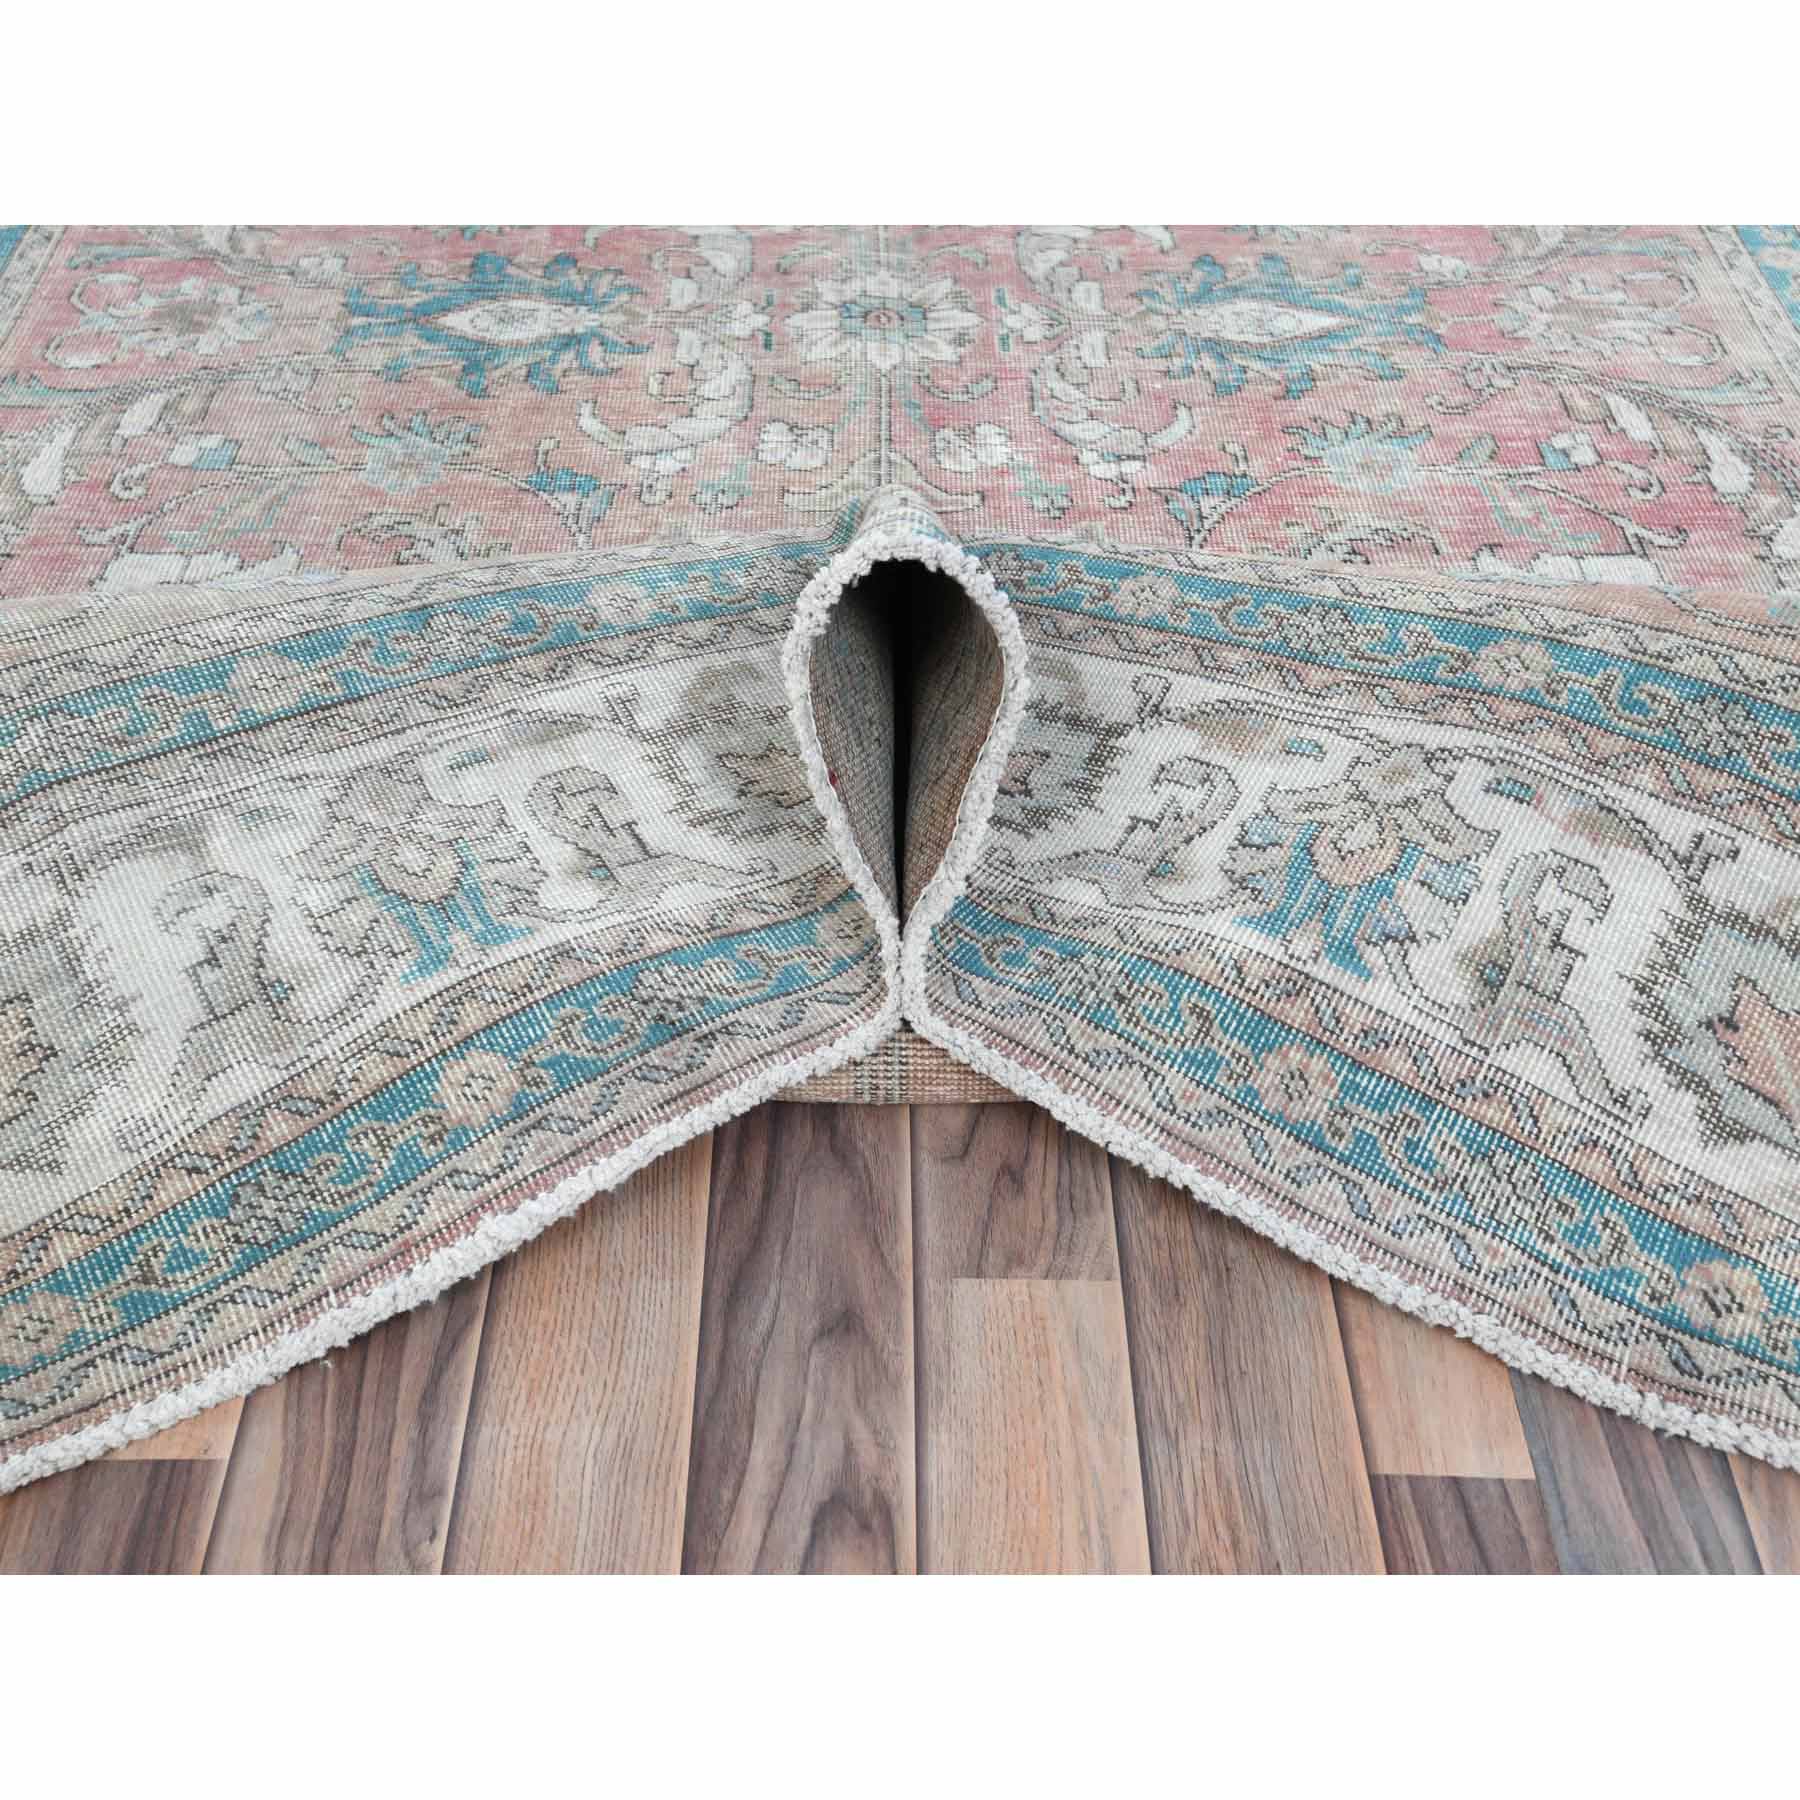 Overdyed-Vintage-Hand-Knotted-Rug-408475